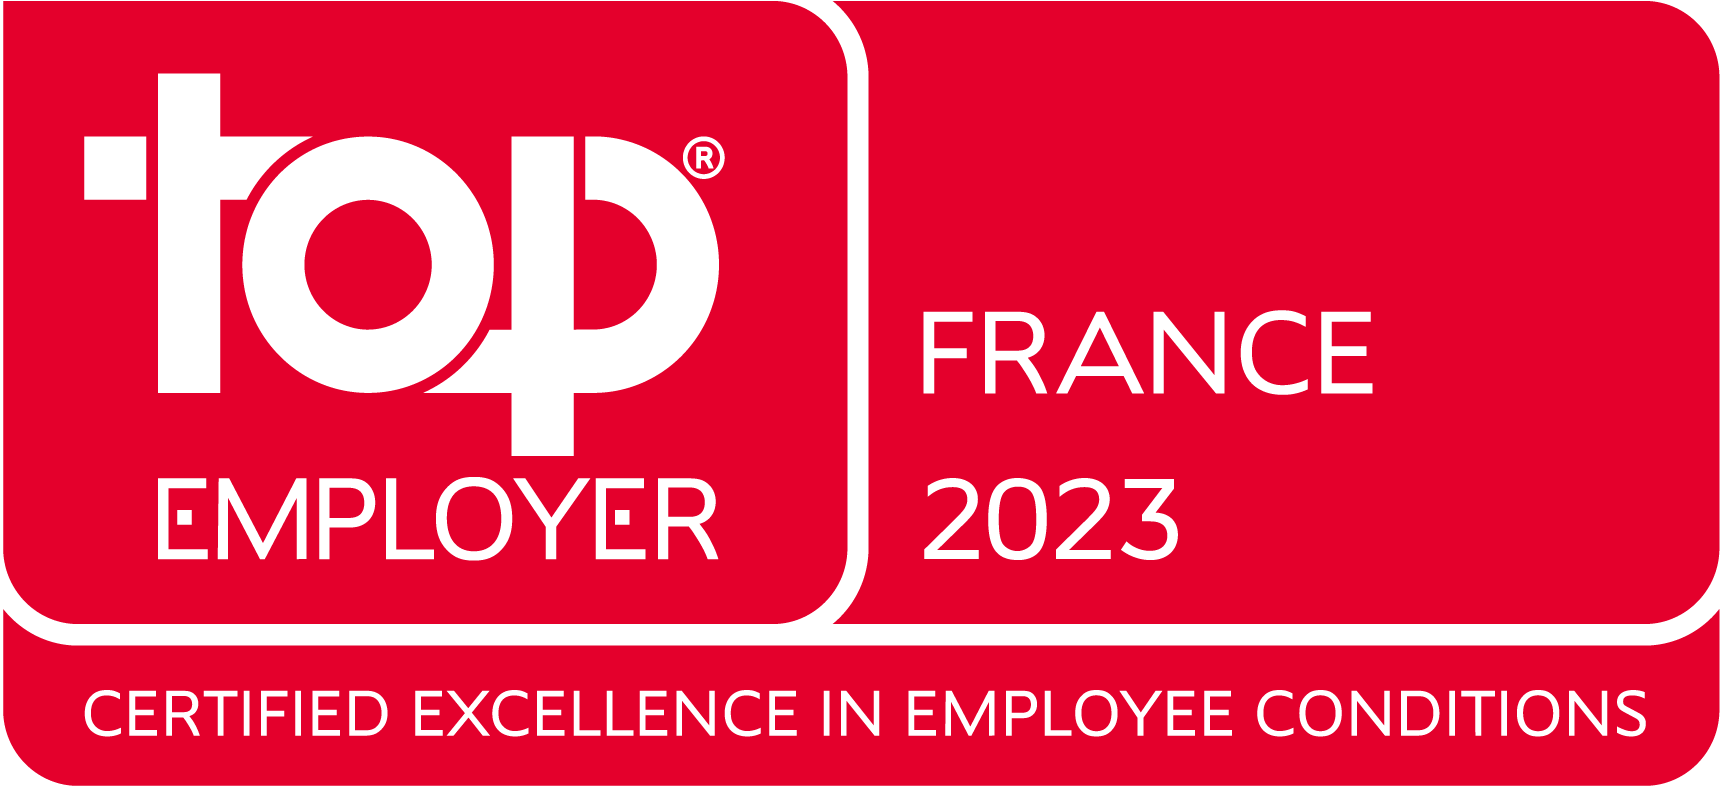 Top_Employer_France_2023.png